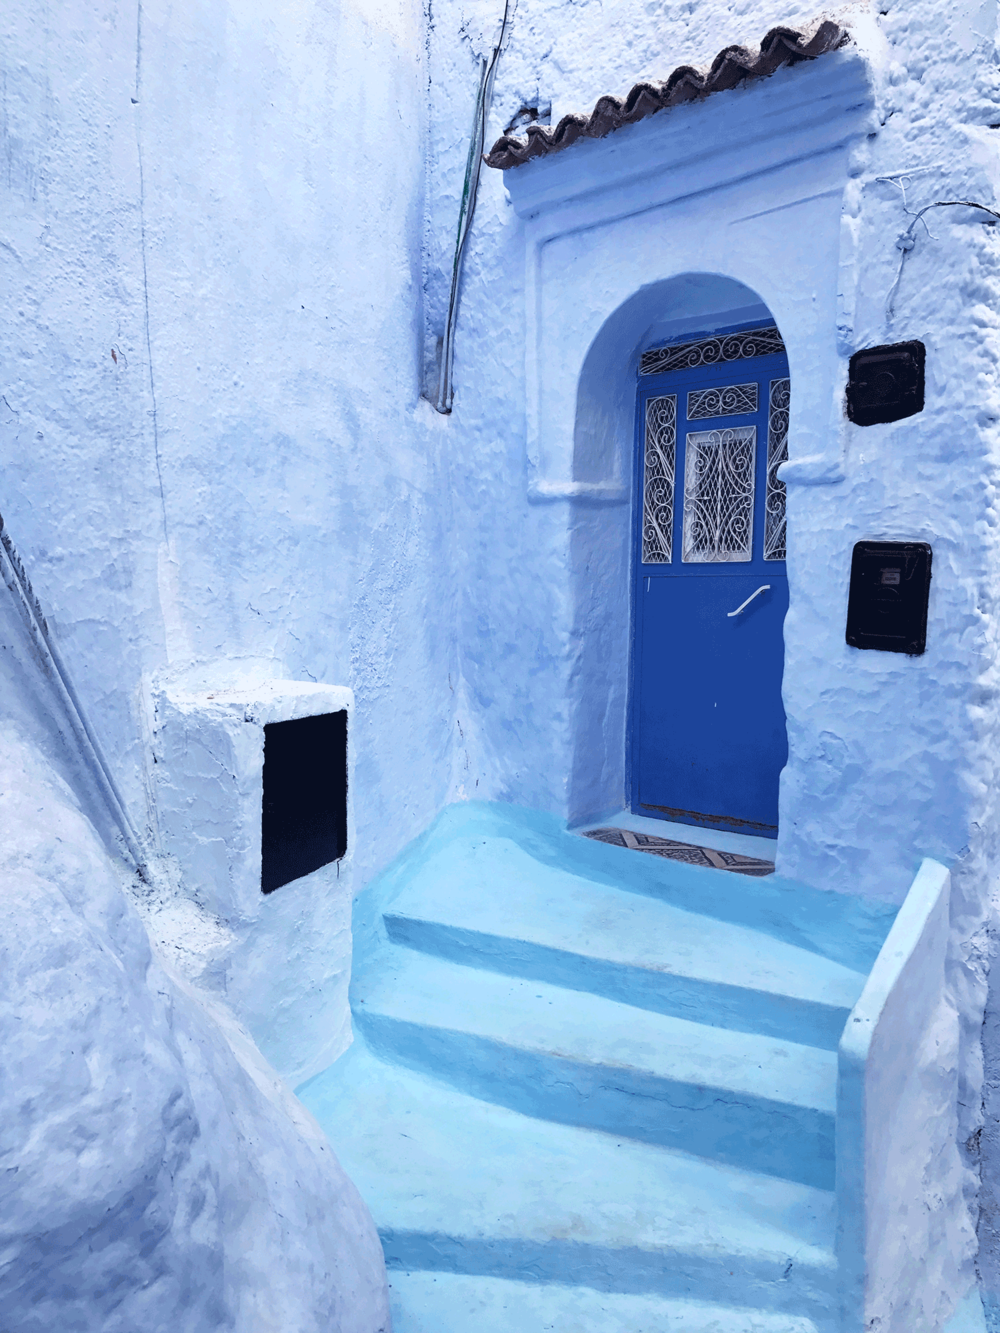 Chefchaouen Morocco | The Blue Pearl